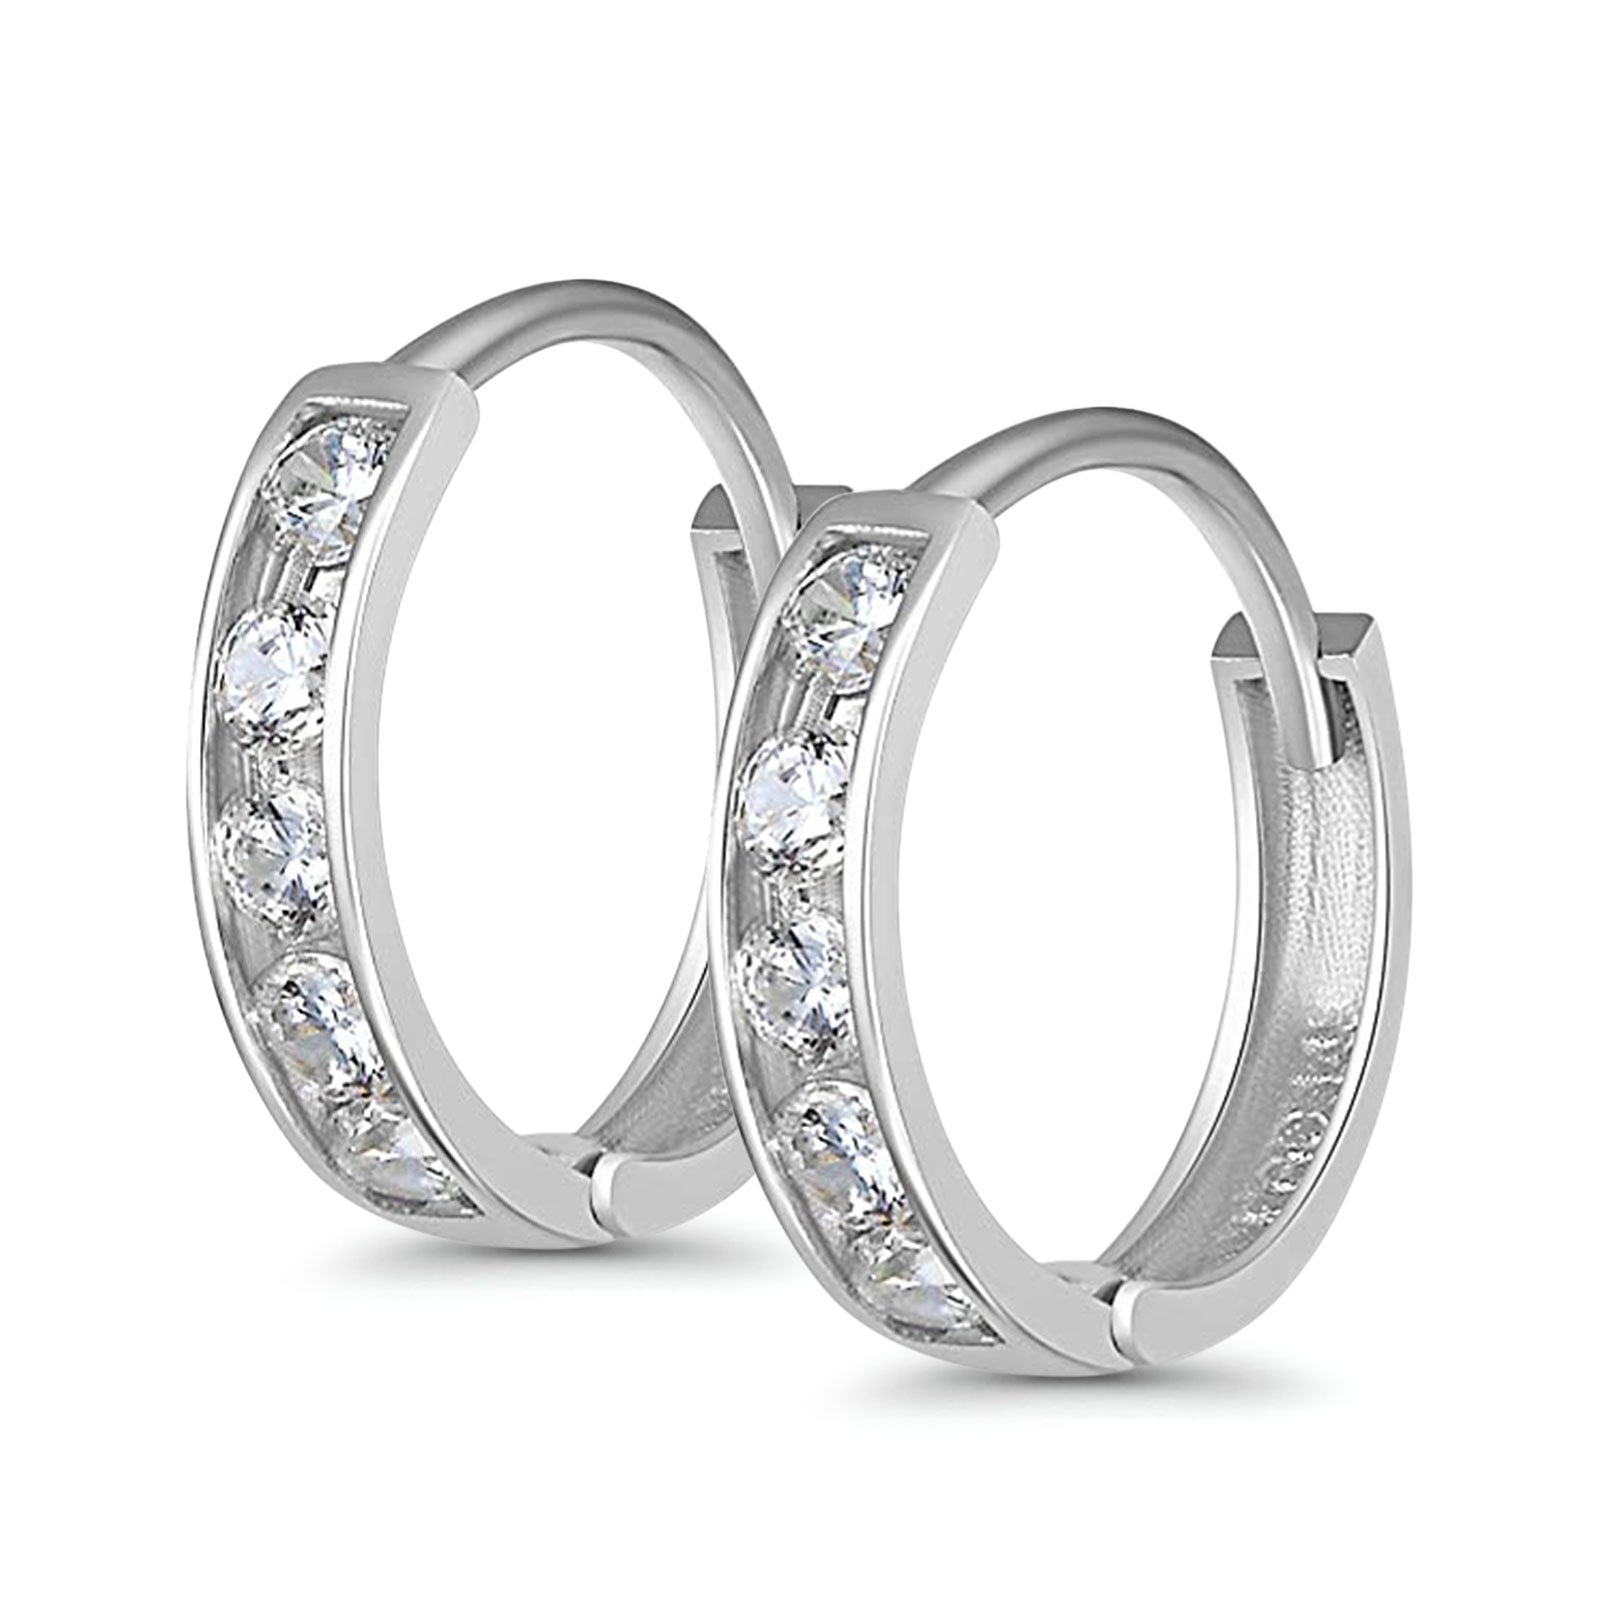 14k White Gold Half Eternity Round CZ Channel Set Hoop Huggie Earrings - 3 Differnet Size Available, Best Birthday Gift for Her